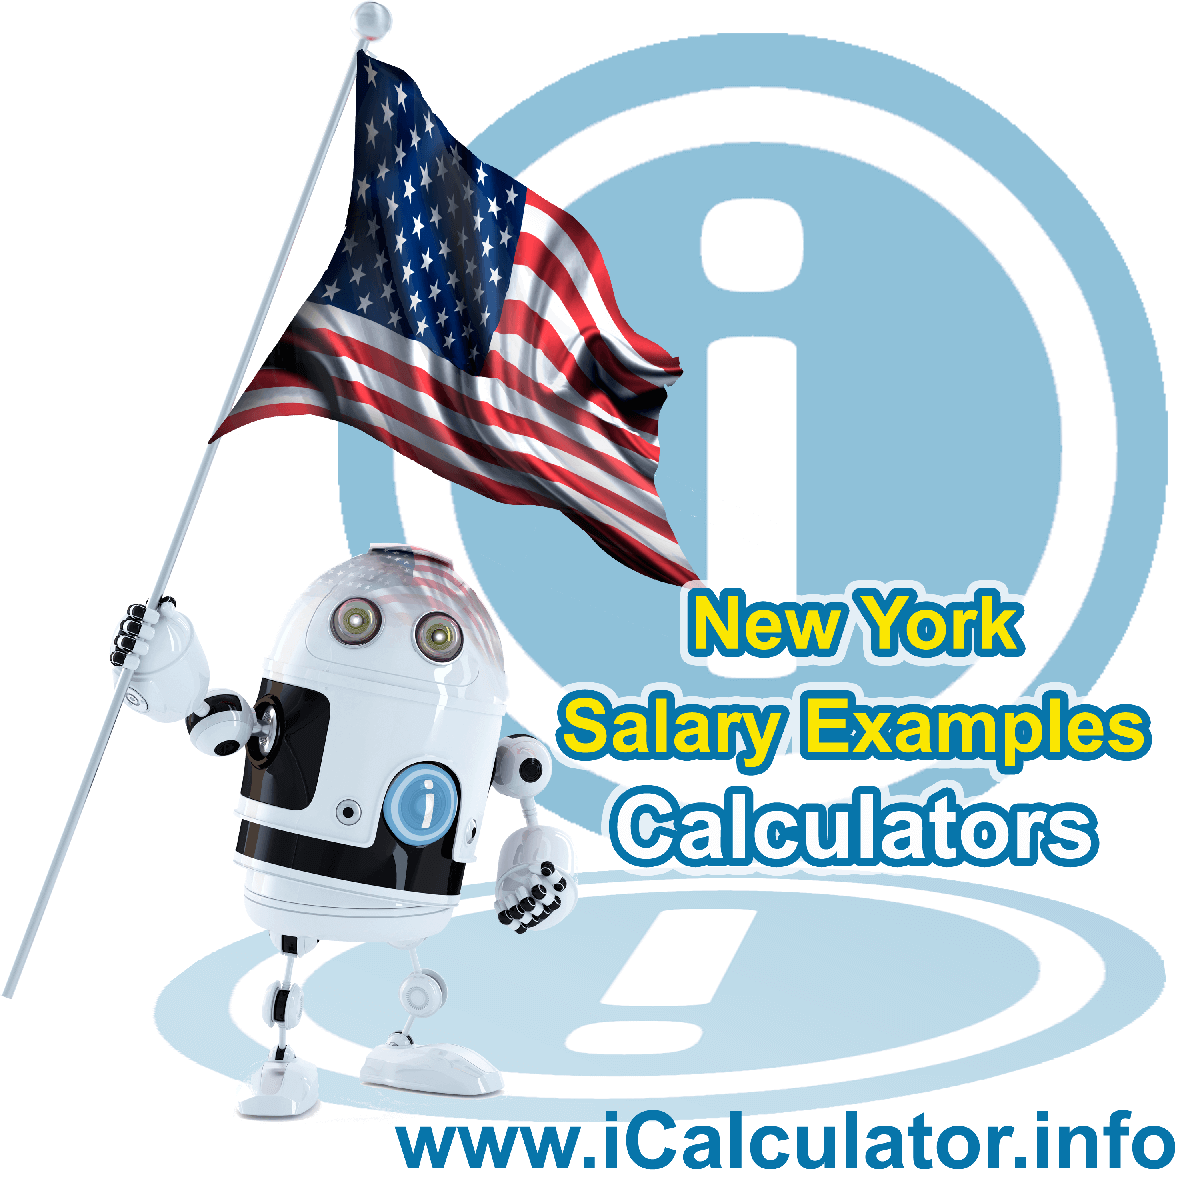 $ 125,000.00 After Tax in New York| iCalculator™ | $ 125,000.00 salary after tax example for 2023 tax year in New York. Federal and New York State income tax plus social security deductions and personal tax exemptions and tax allowances for 2023 